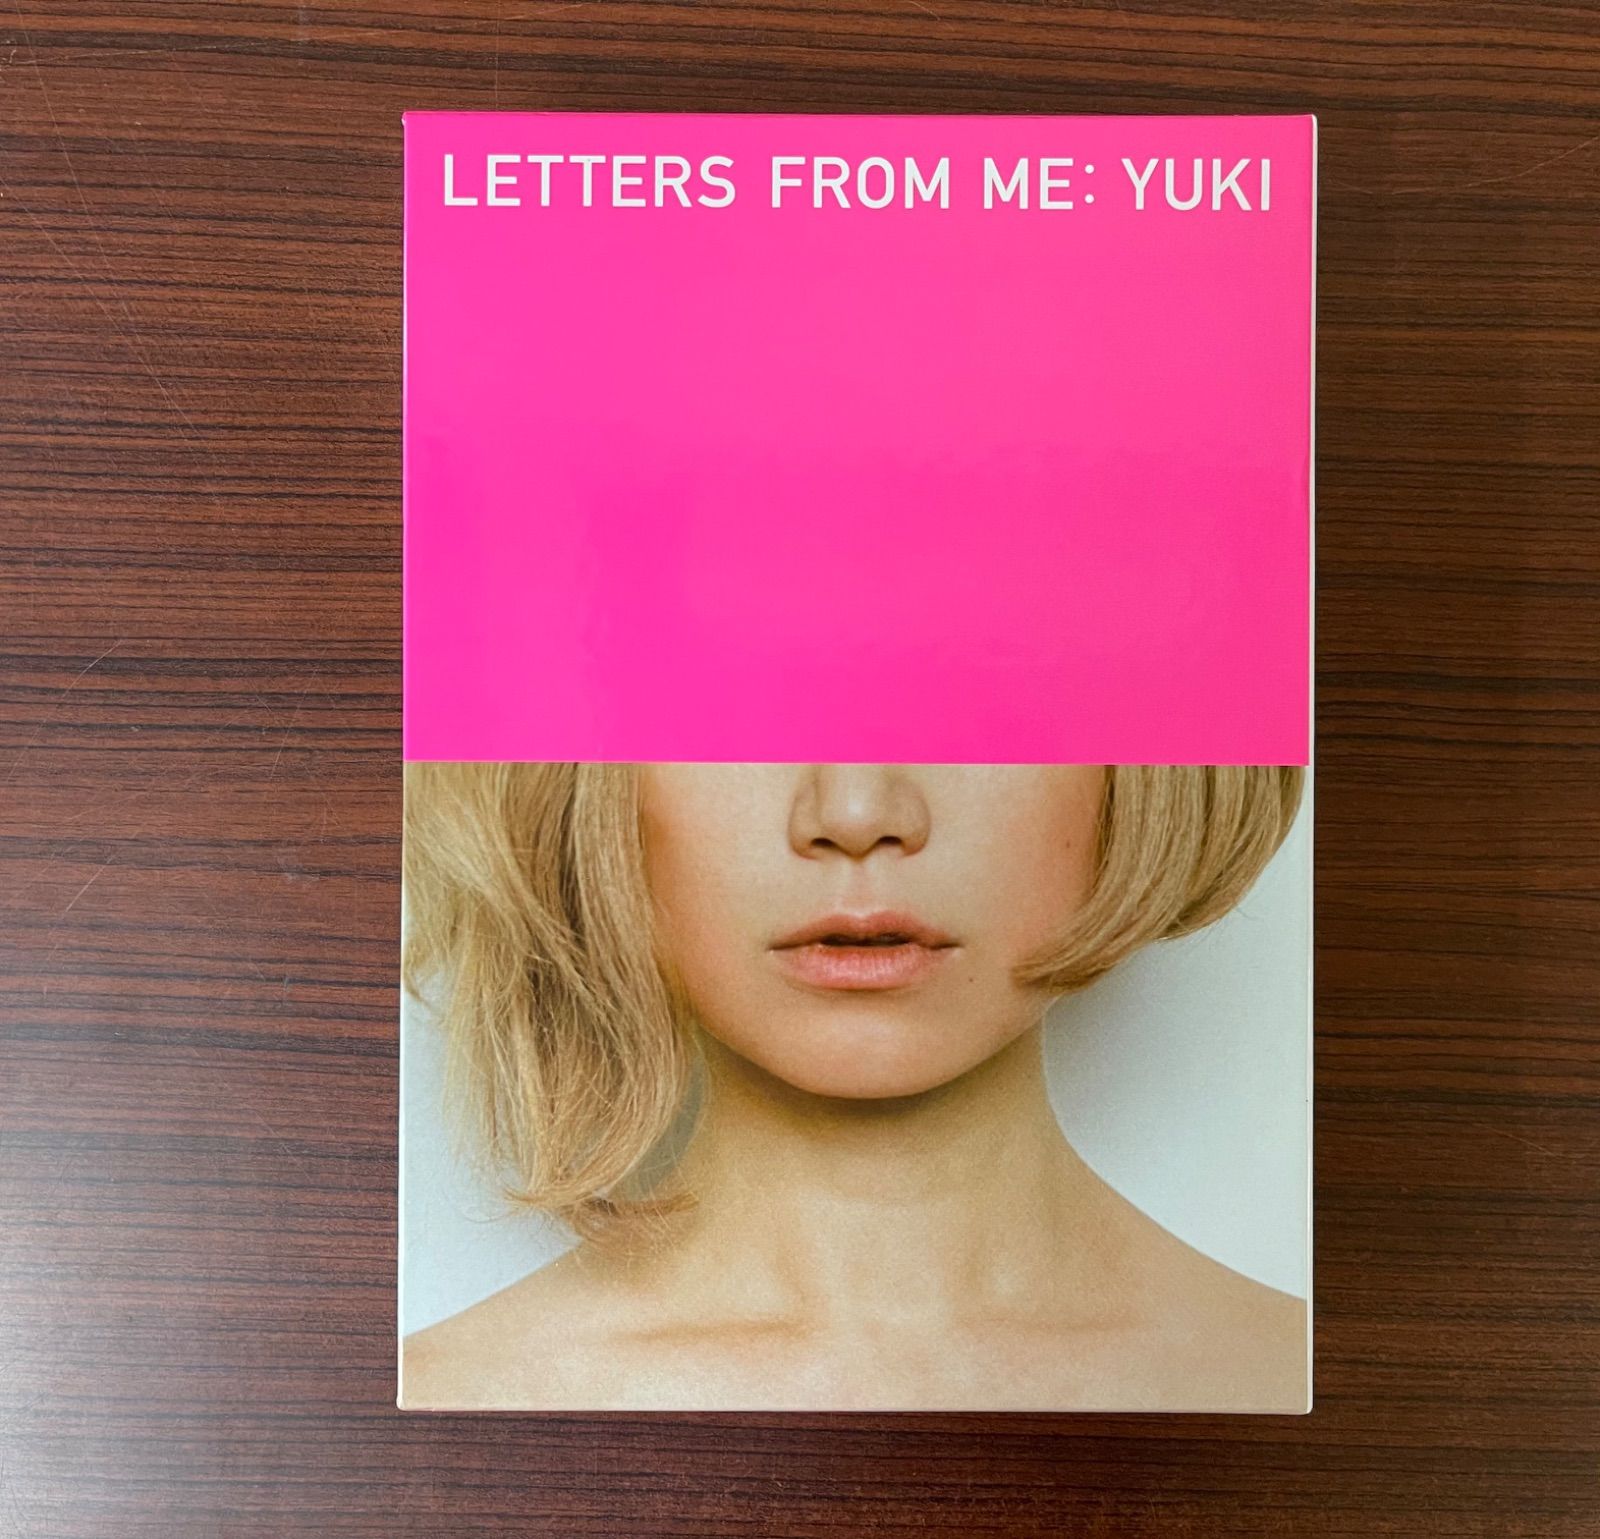 LETTERS FOR ME: YUKI